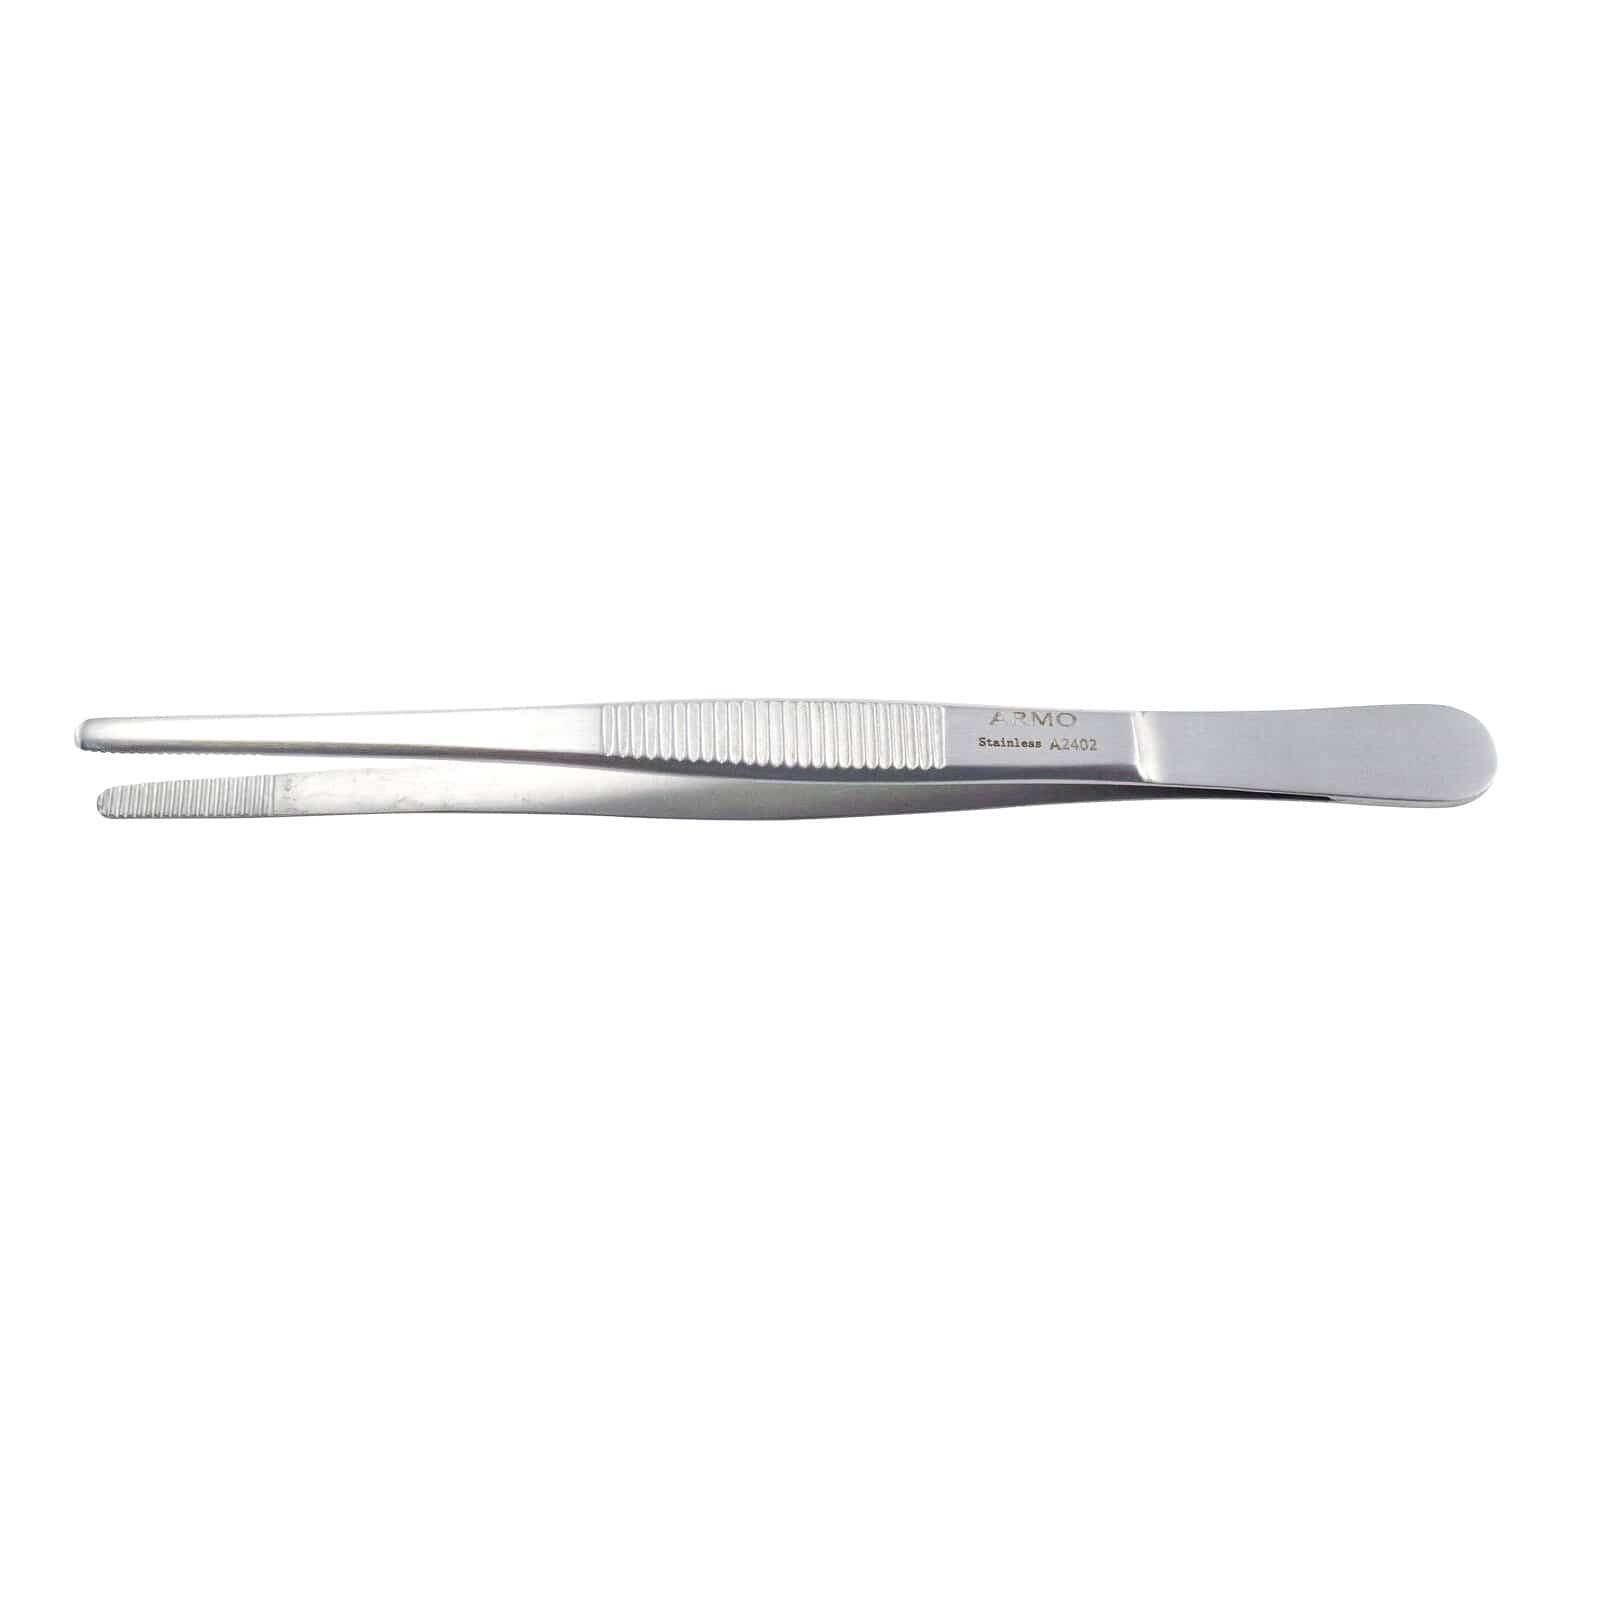 Armo Surgical Instruments 13cm / Blunt End Armo General Dressing and Tissue Forceps